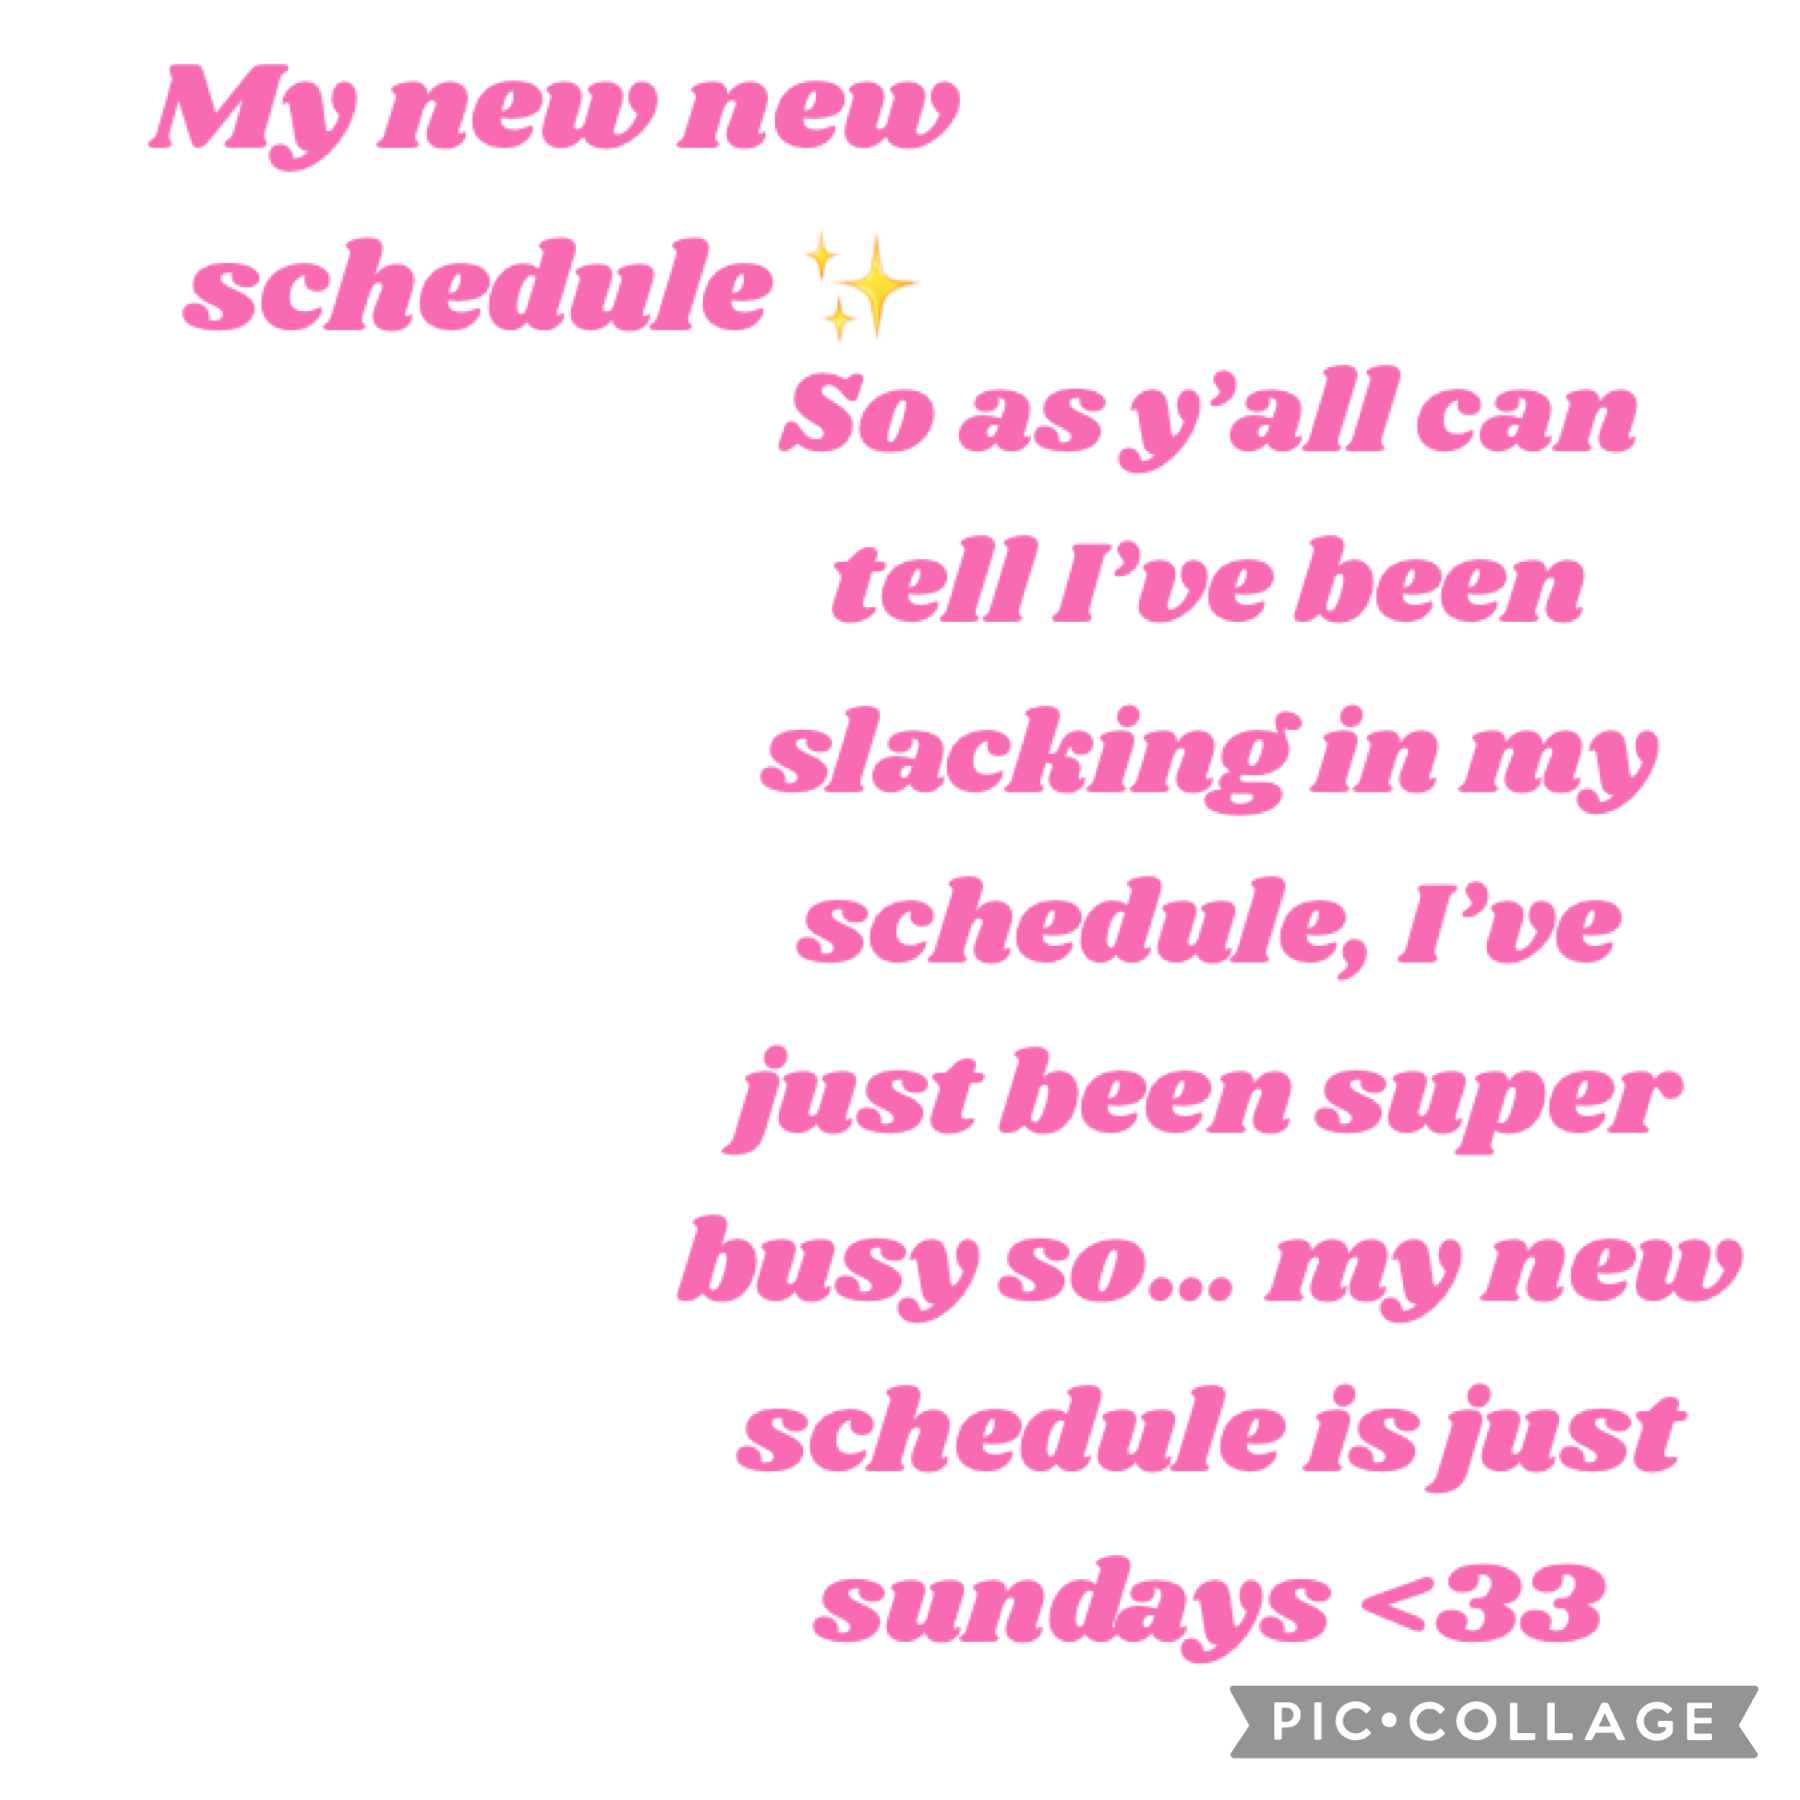 ✨Tap✨
I’m really sorry for not posting, but I think this new schedule will help <33.
Stay positive xoxo,
Pink-Petals